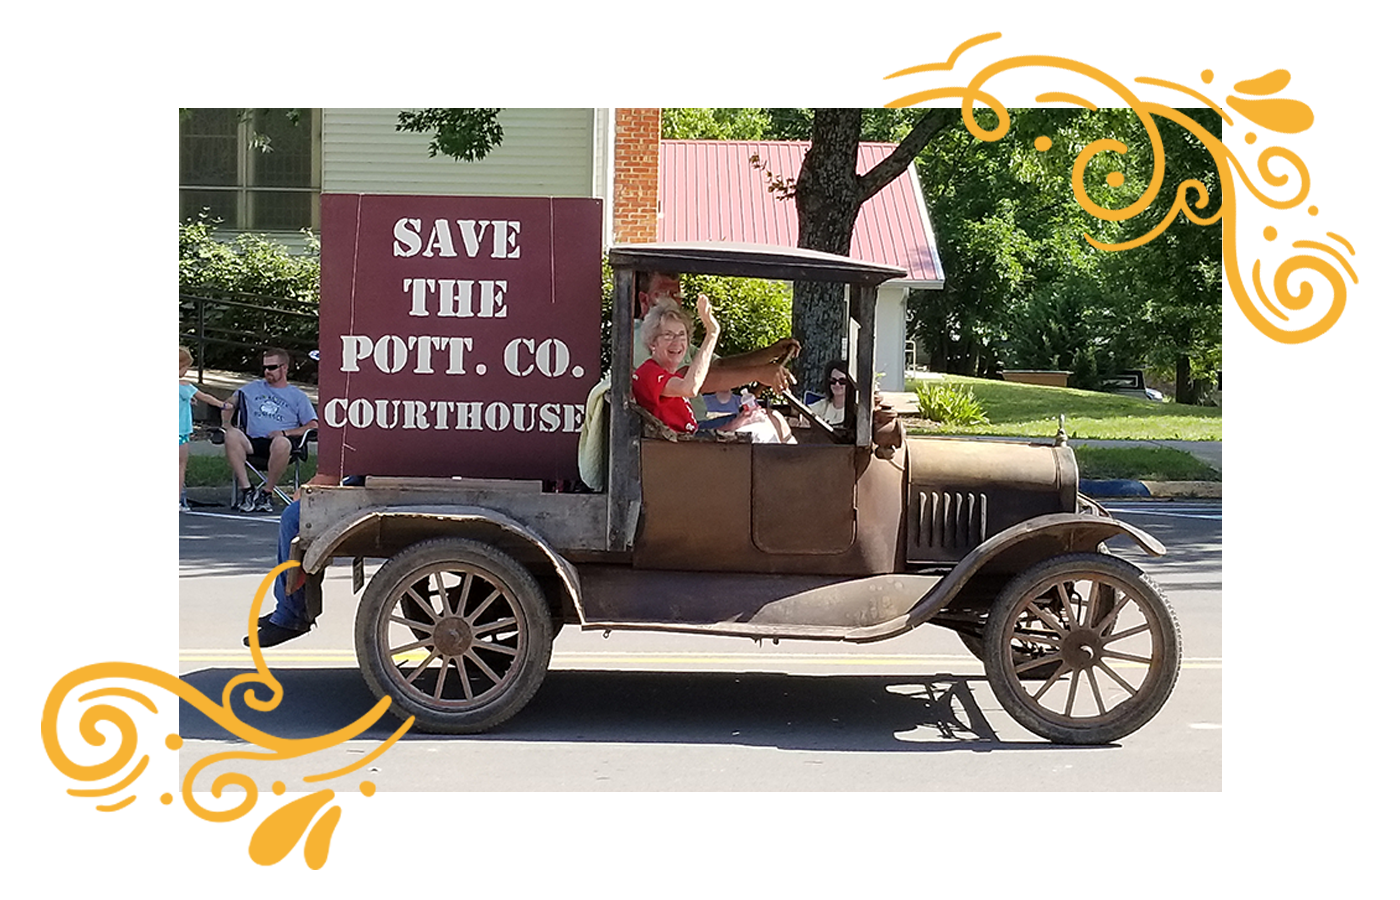 Citizens for Courthouse Conservation rides in local parade